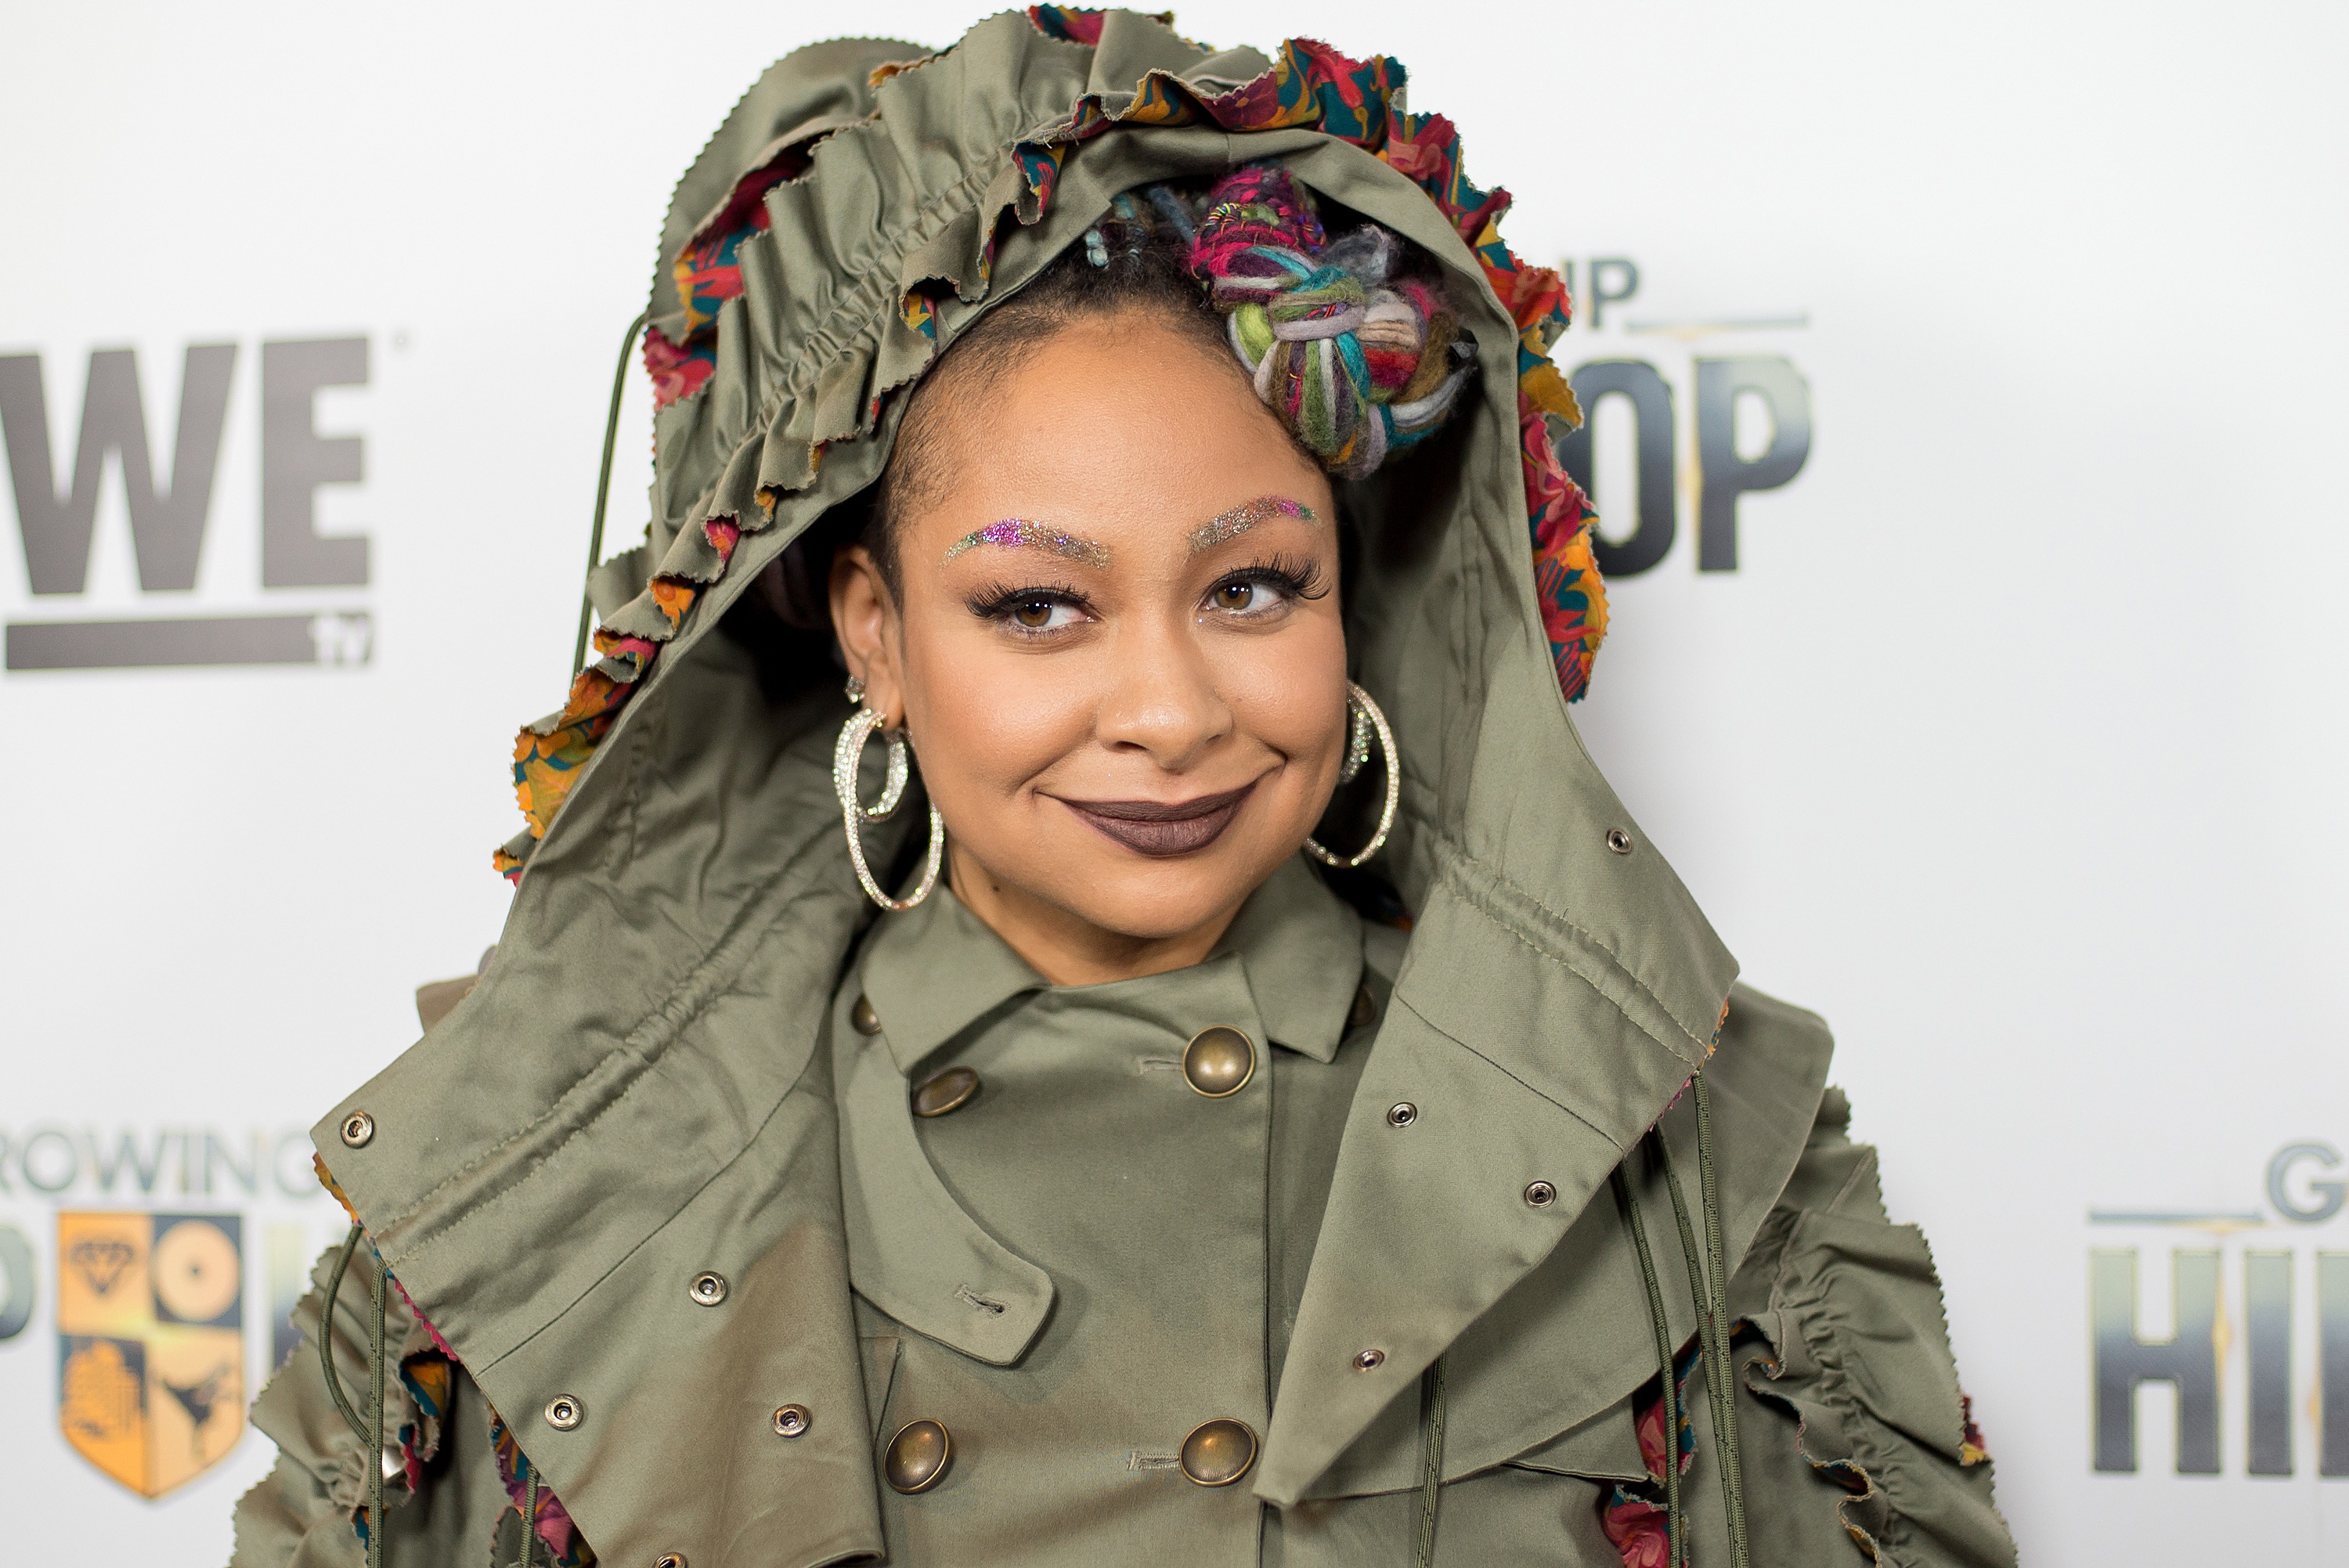 Raven-Symone attends WE tv's "Growing Up Hip Hop" premiere party at Haus on December 10, 2015 in New York City. (Mike Pont—WireImage/Getty Images)